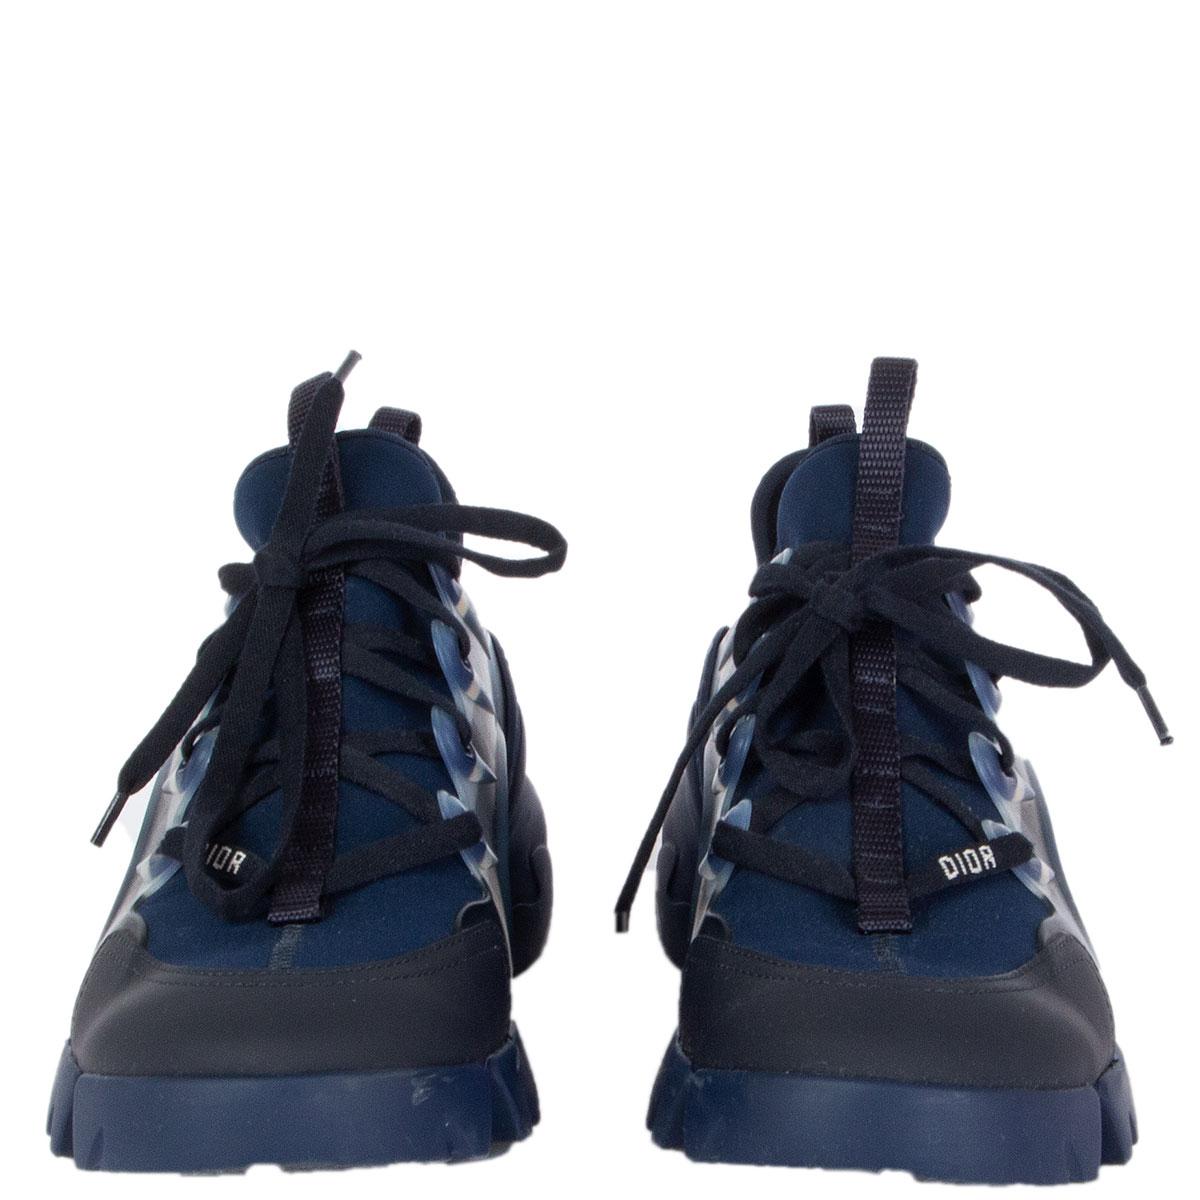 100% authentic Christian Dior D-Connect sneakers in indigo blue neoprene, it features transparent rubber yokes and a wrap-around rubber sole. The grosgrain ribbon stitched on the upper compliments the tone-on-tone laces with the' D.I.O.R'.